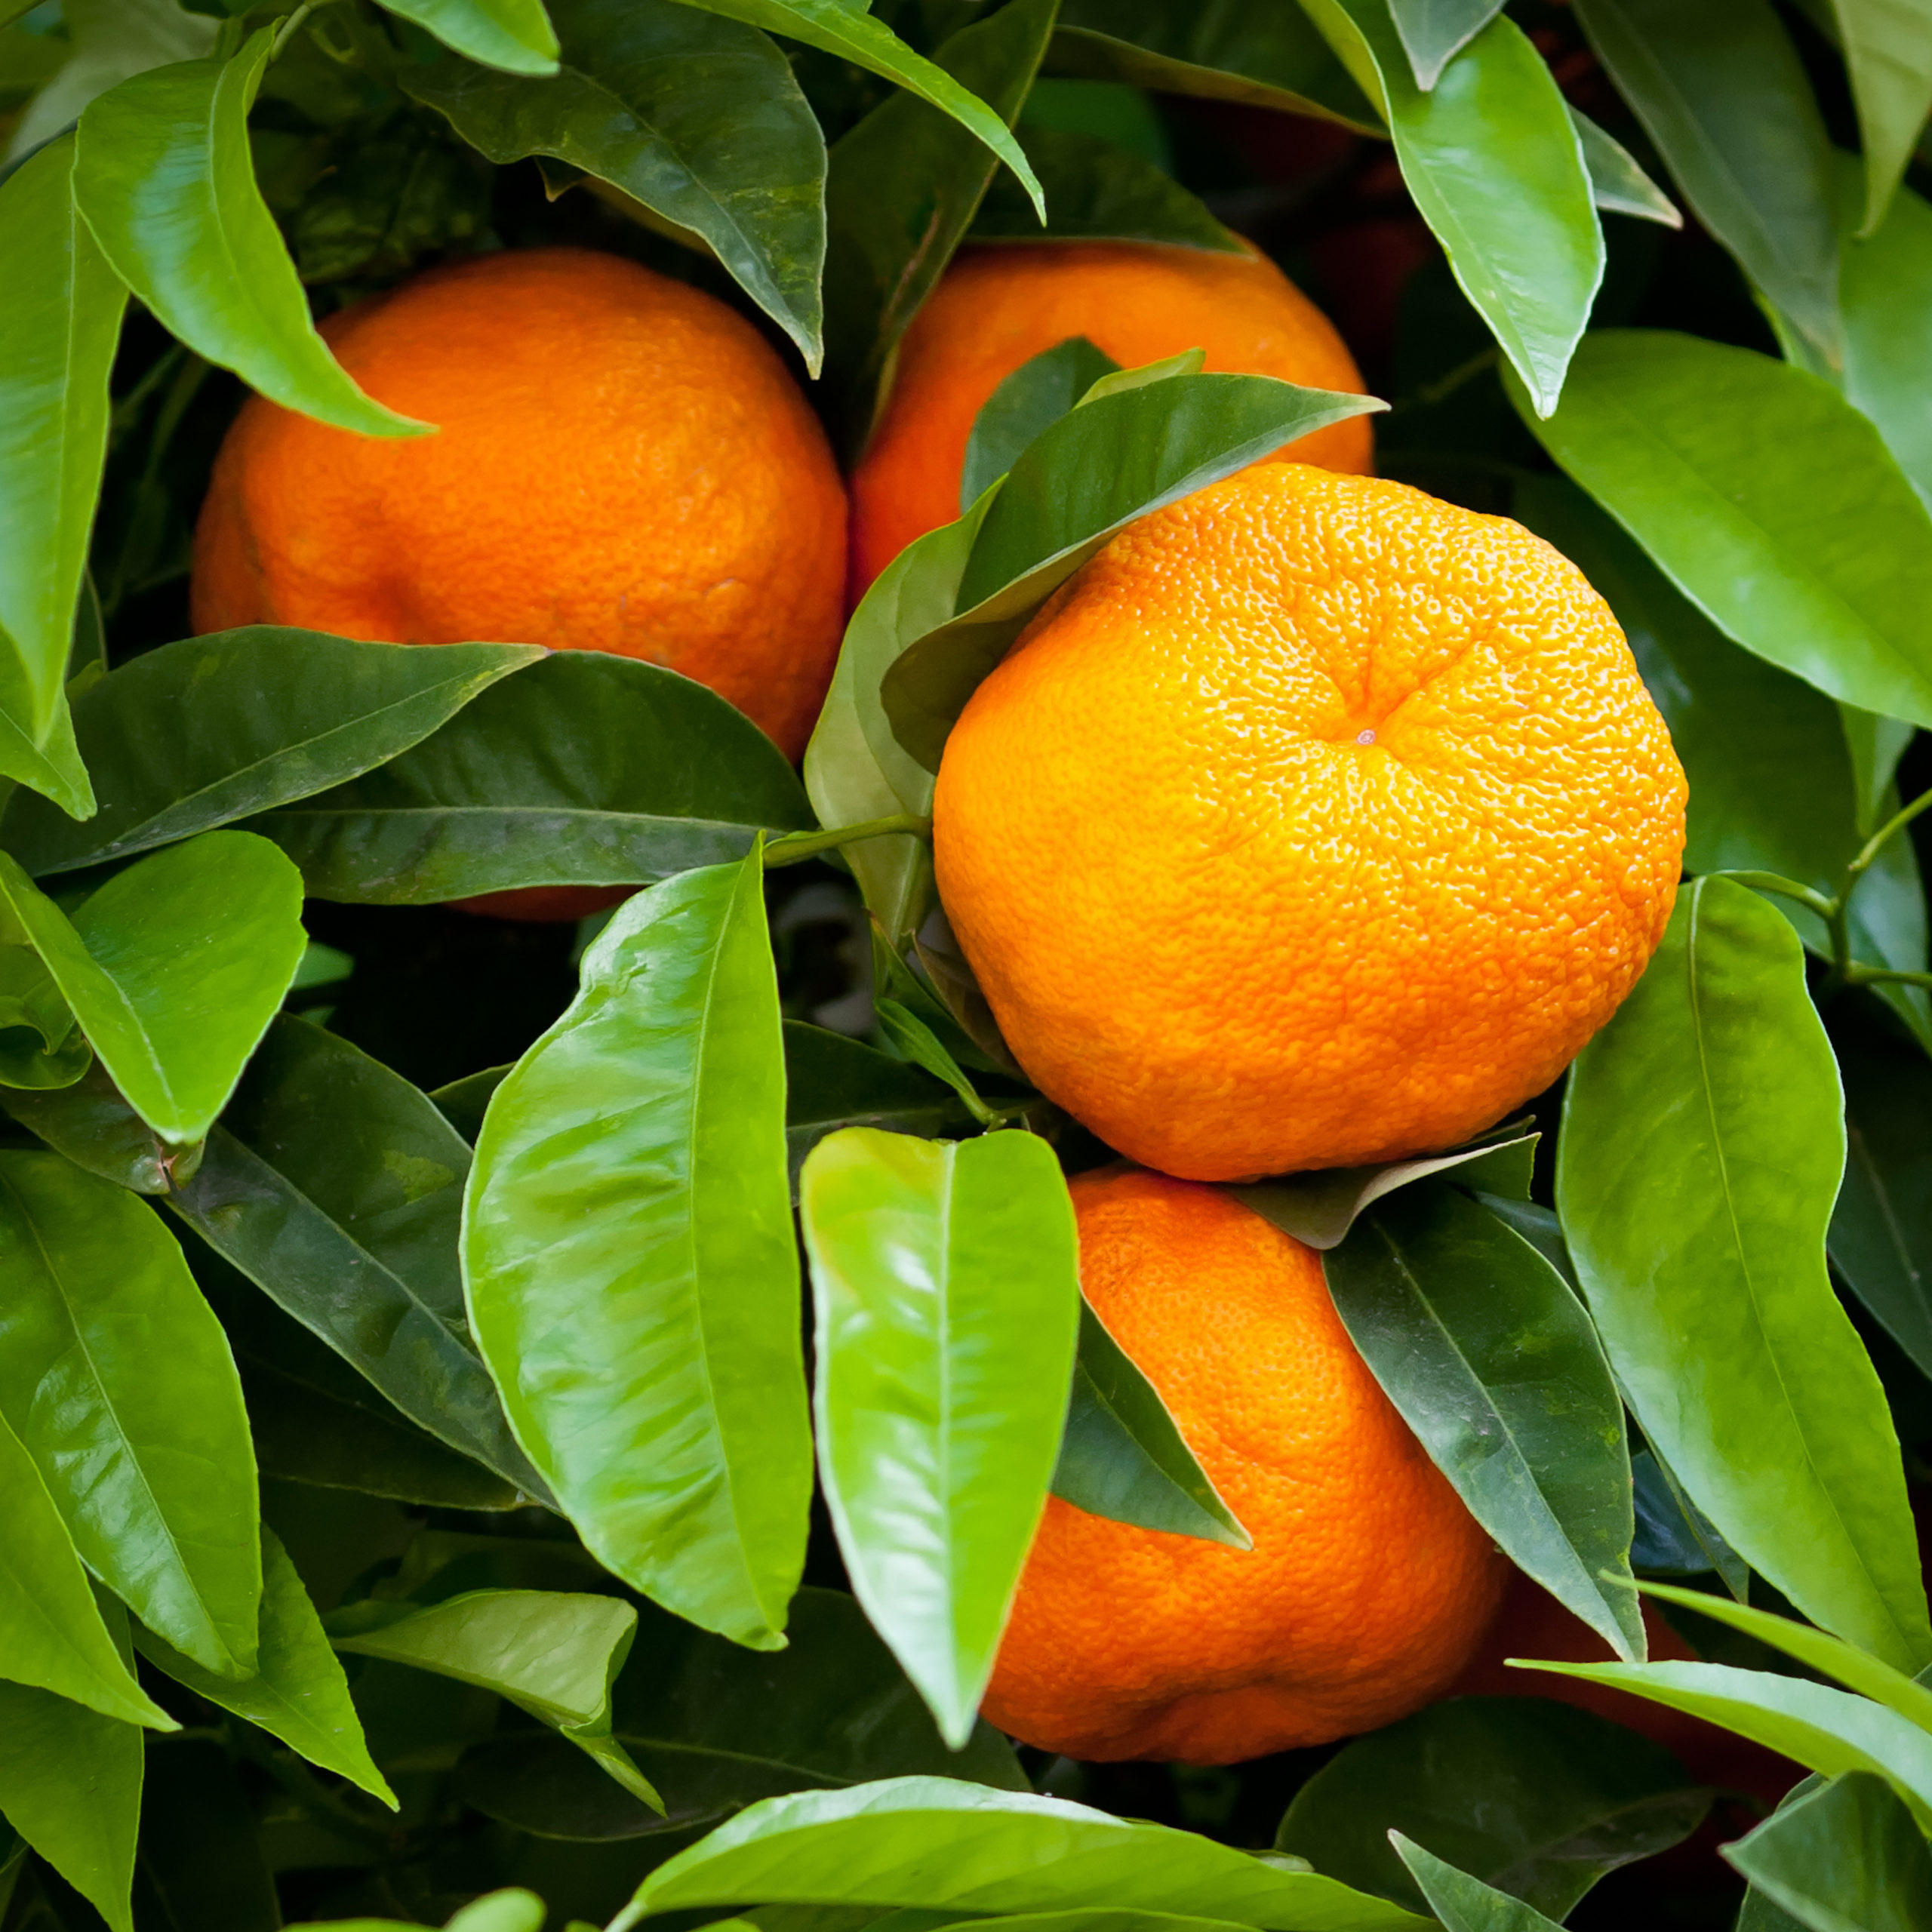 Harvesting Citrus in the Home Garden: Tips and Precautions